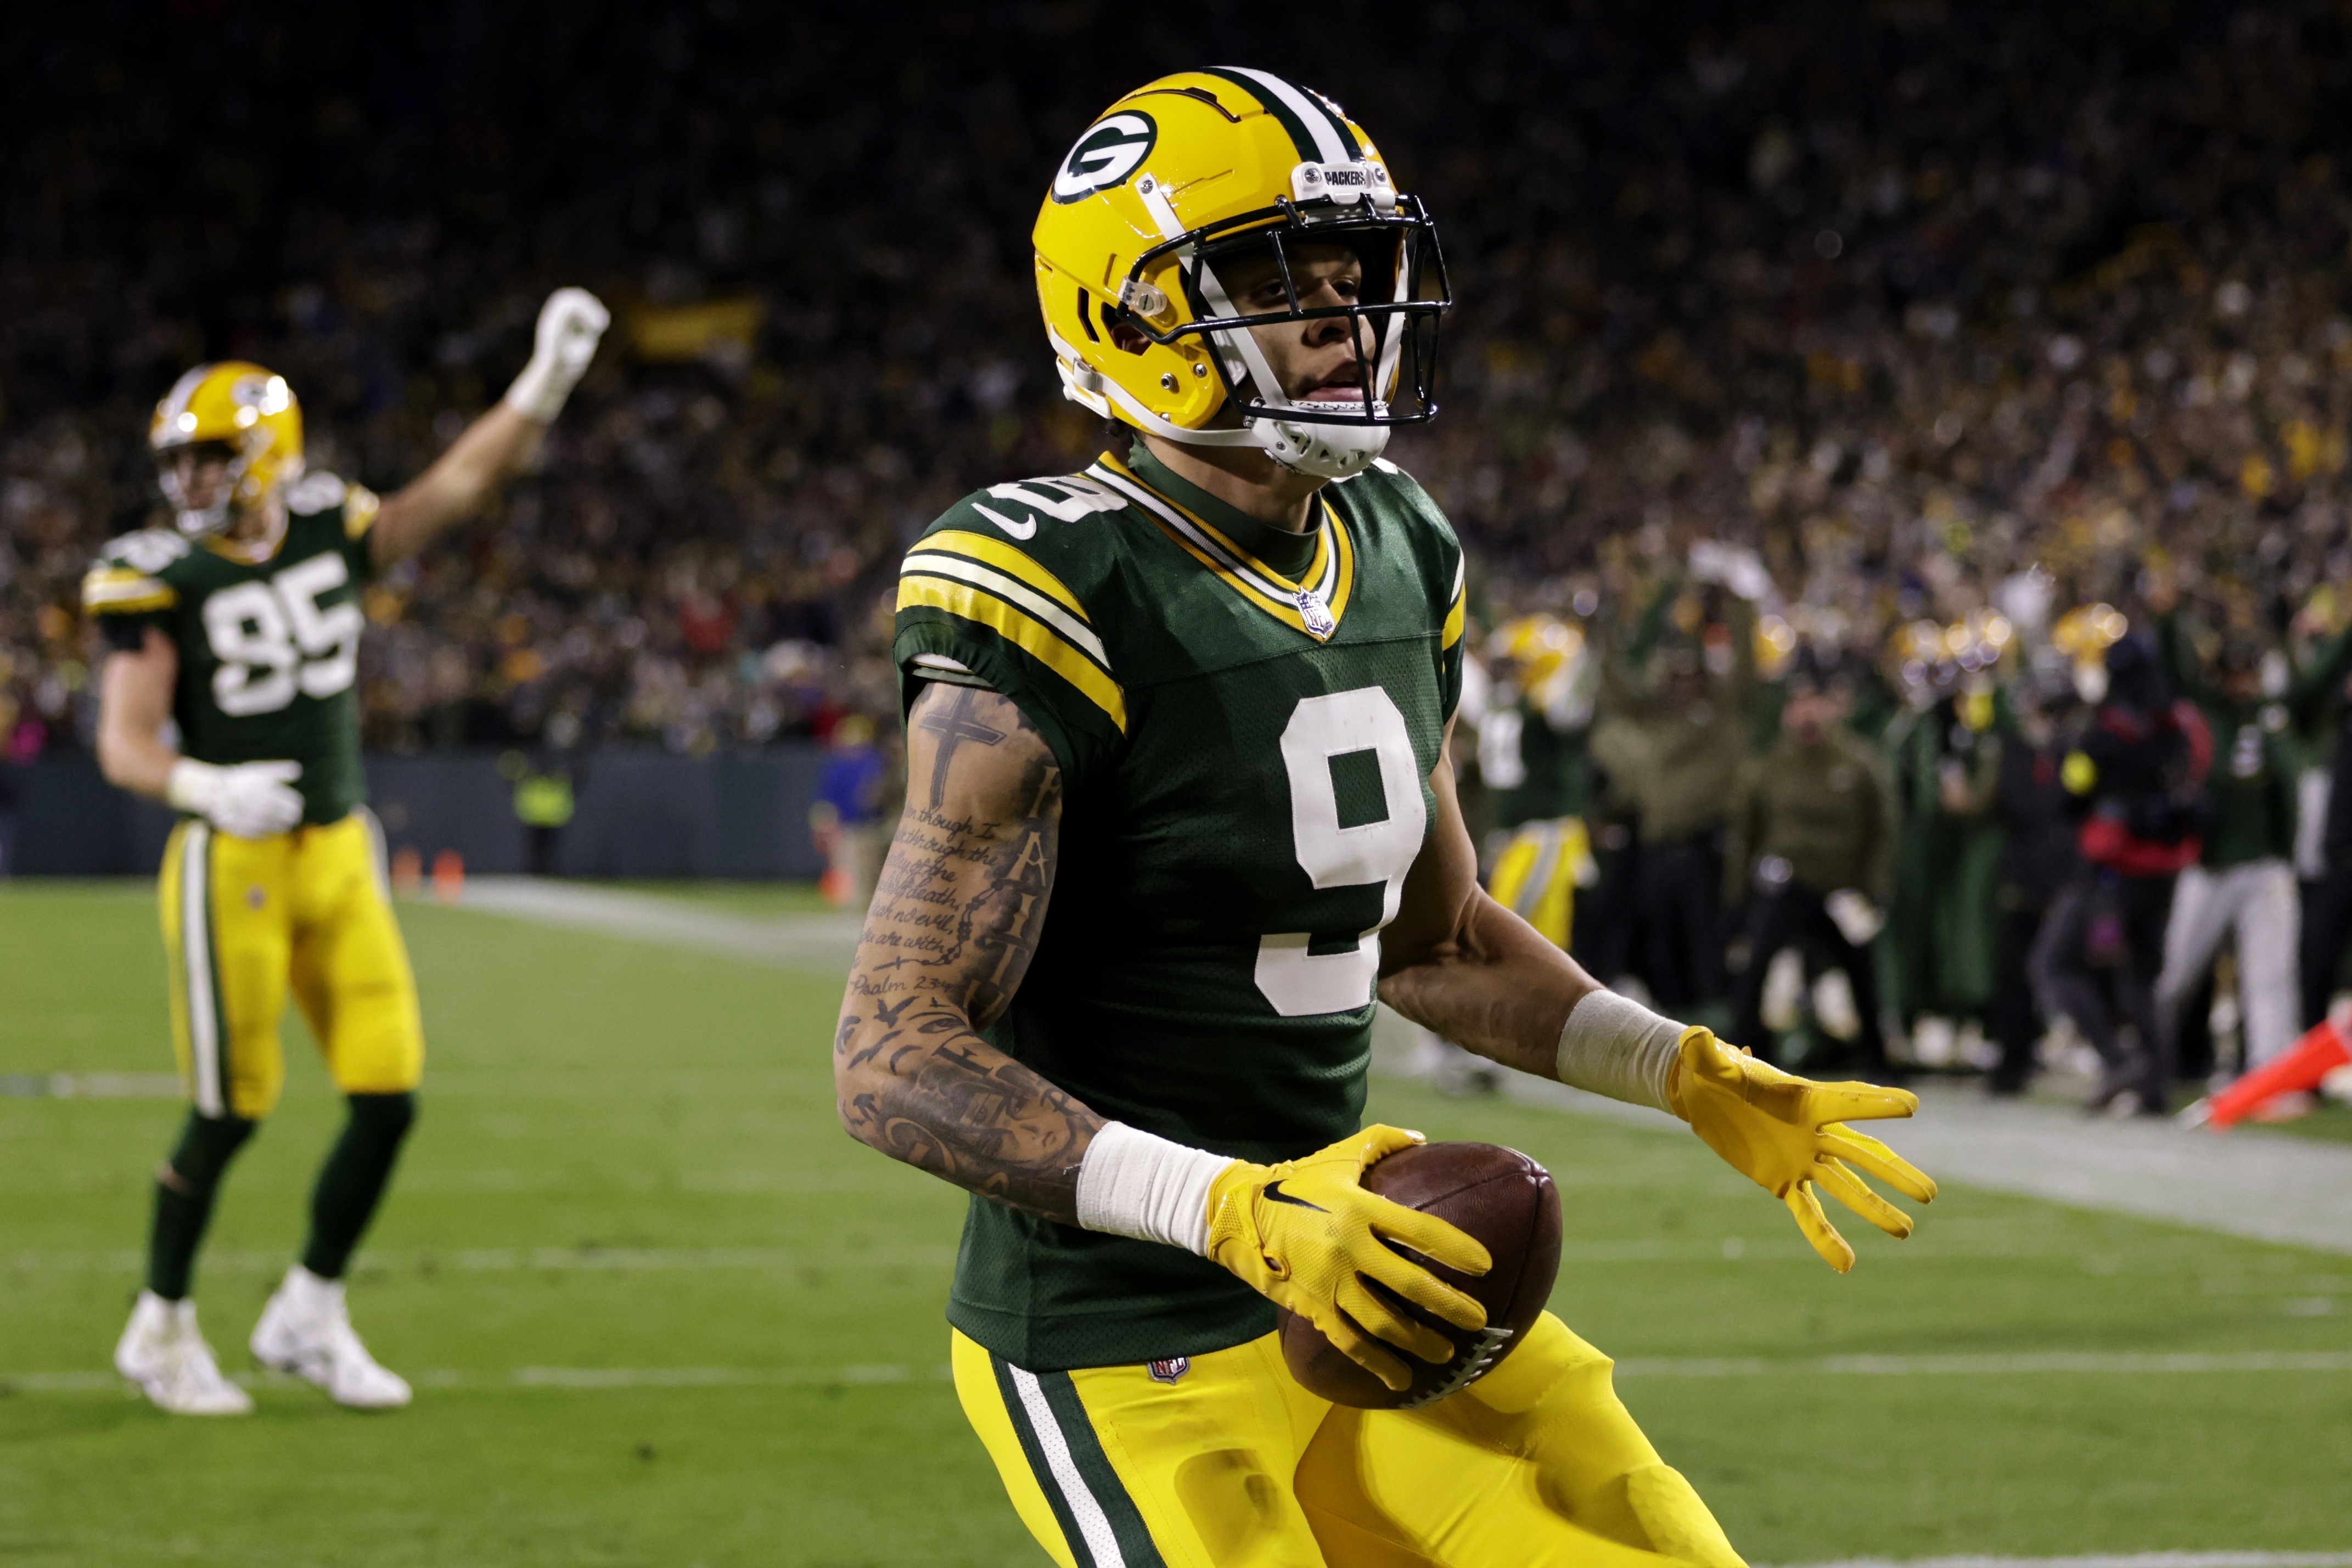 Christian Watson injury update: Packers WR could play vs. Vikings